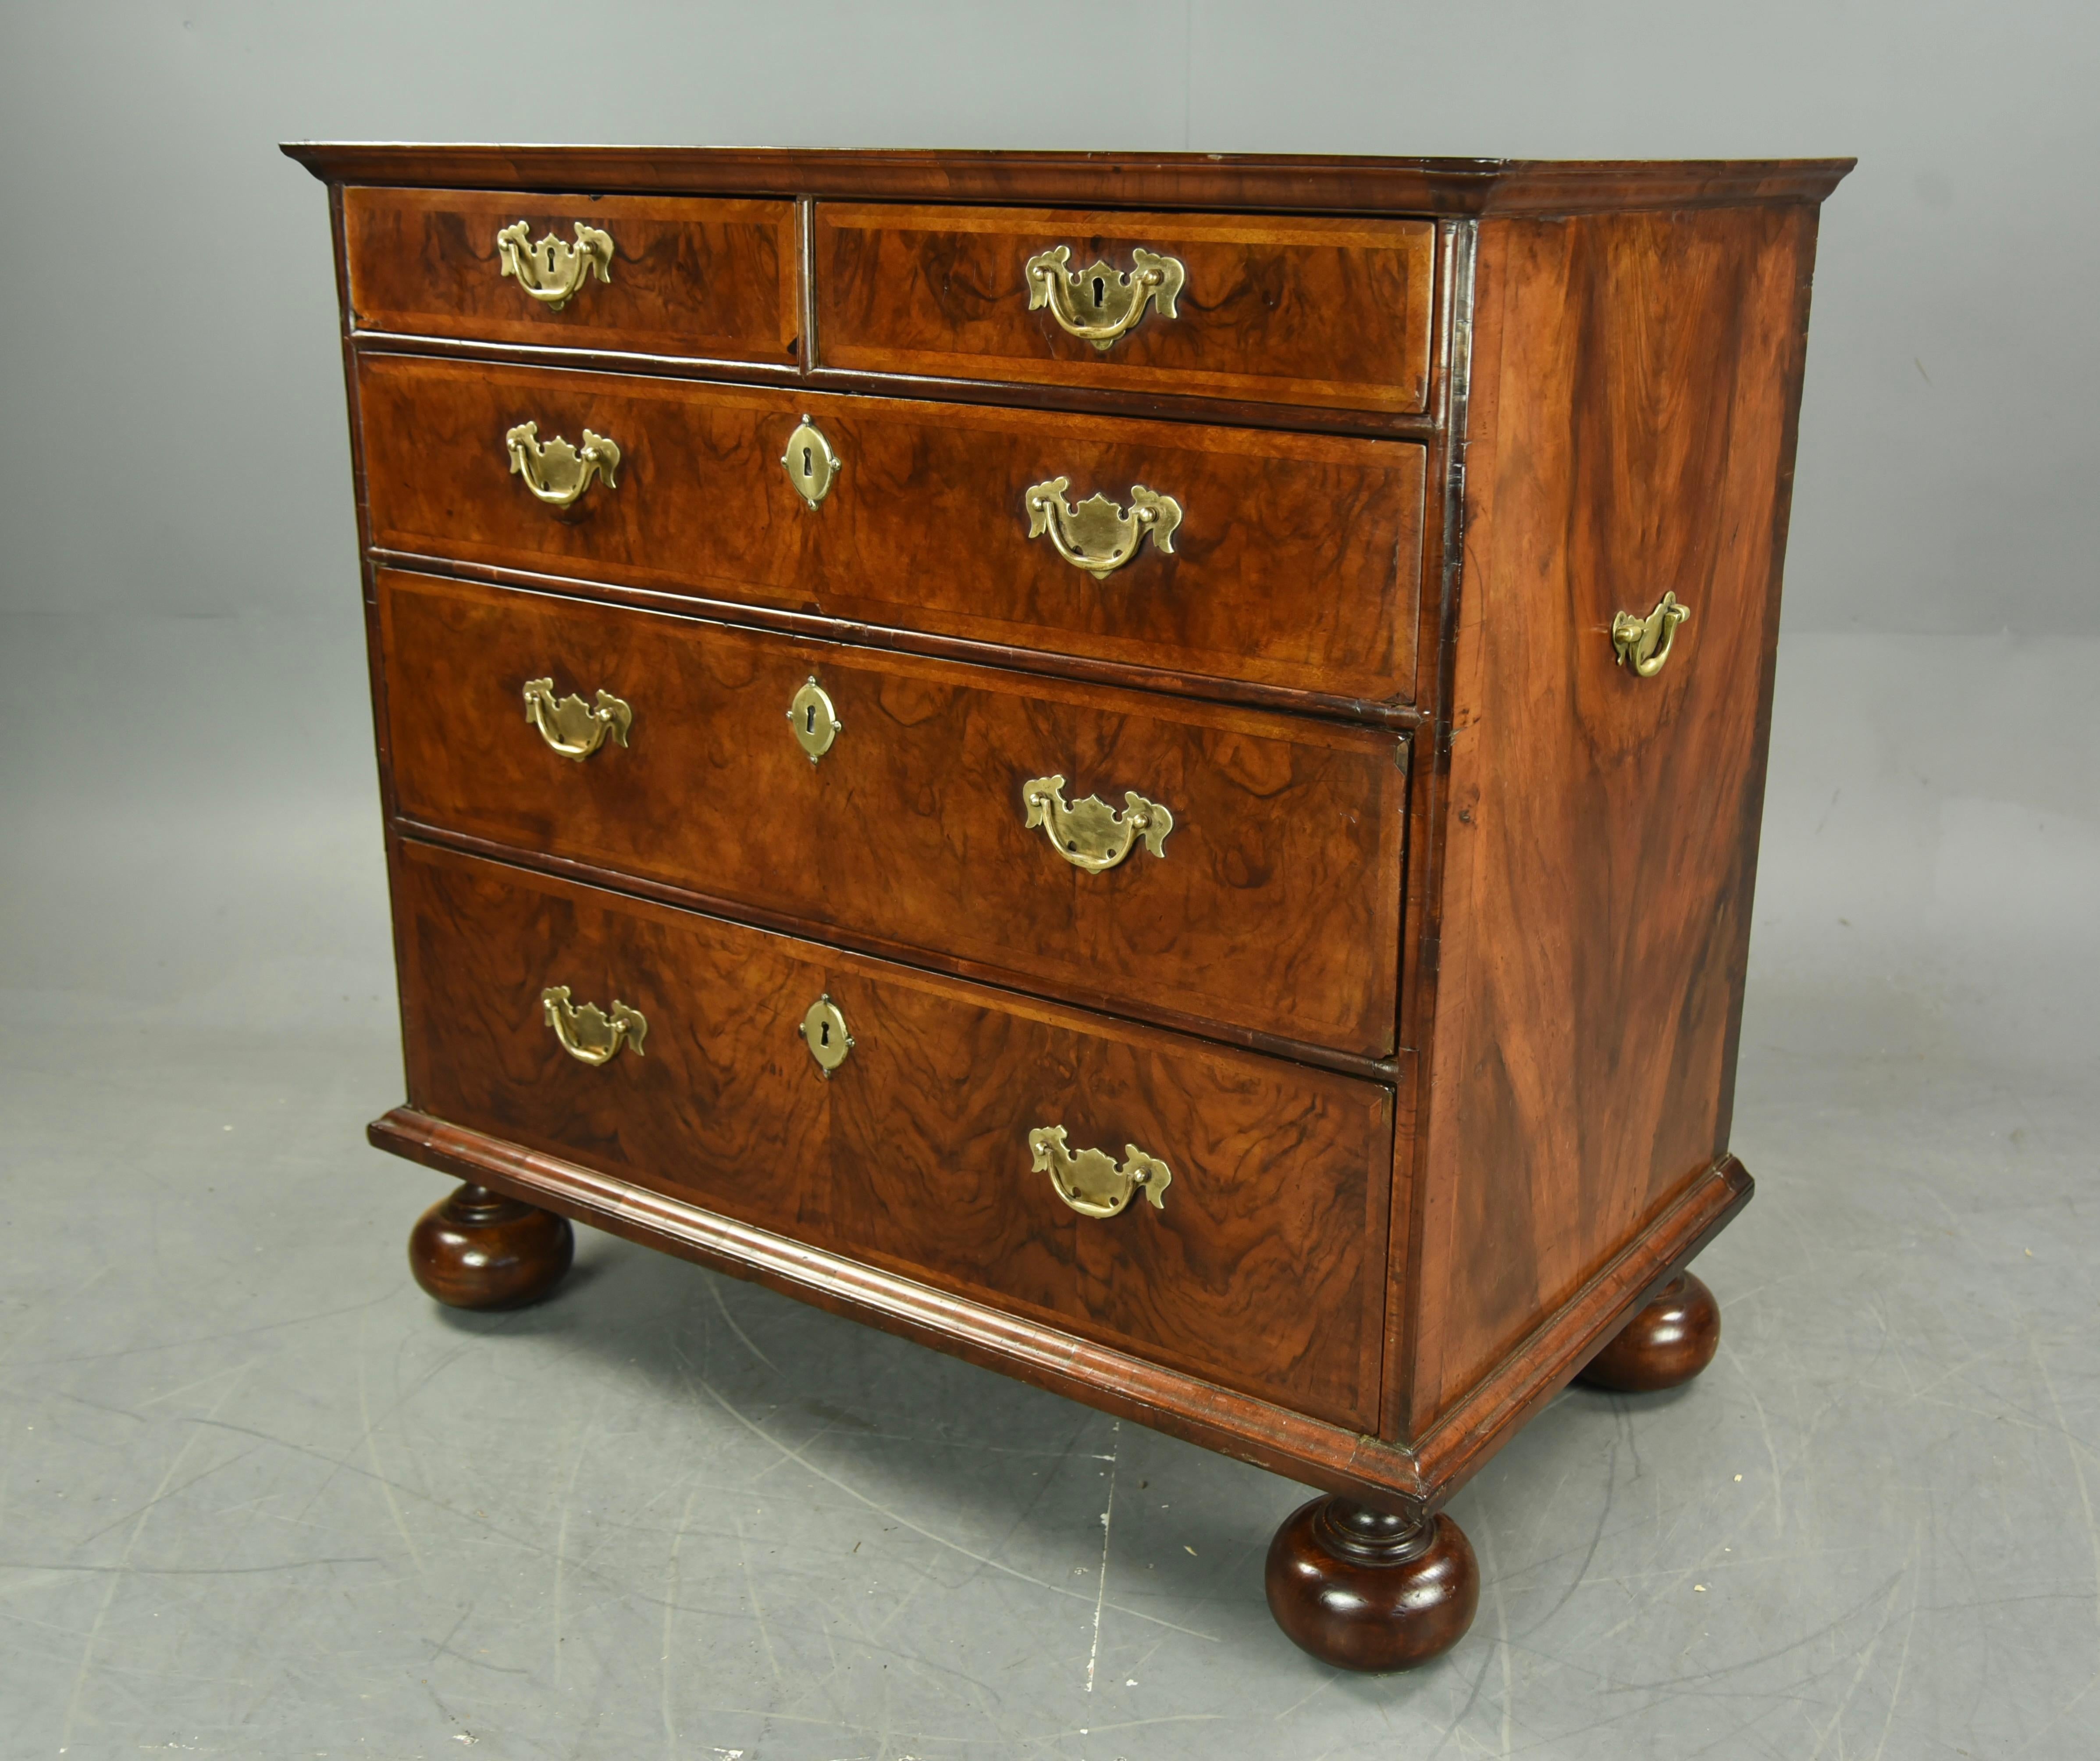 superb Queen Anne walnut chest of drawers circa 1720 .
The chest has a wonderful colour and grain and a great antique patina .
The oak lined drawers are all sound and slide nice and smooth as they should .
A very decorative chest of drawers that